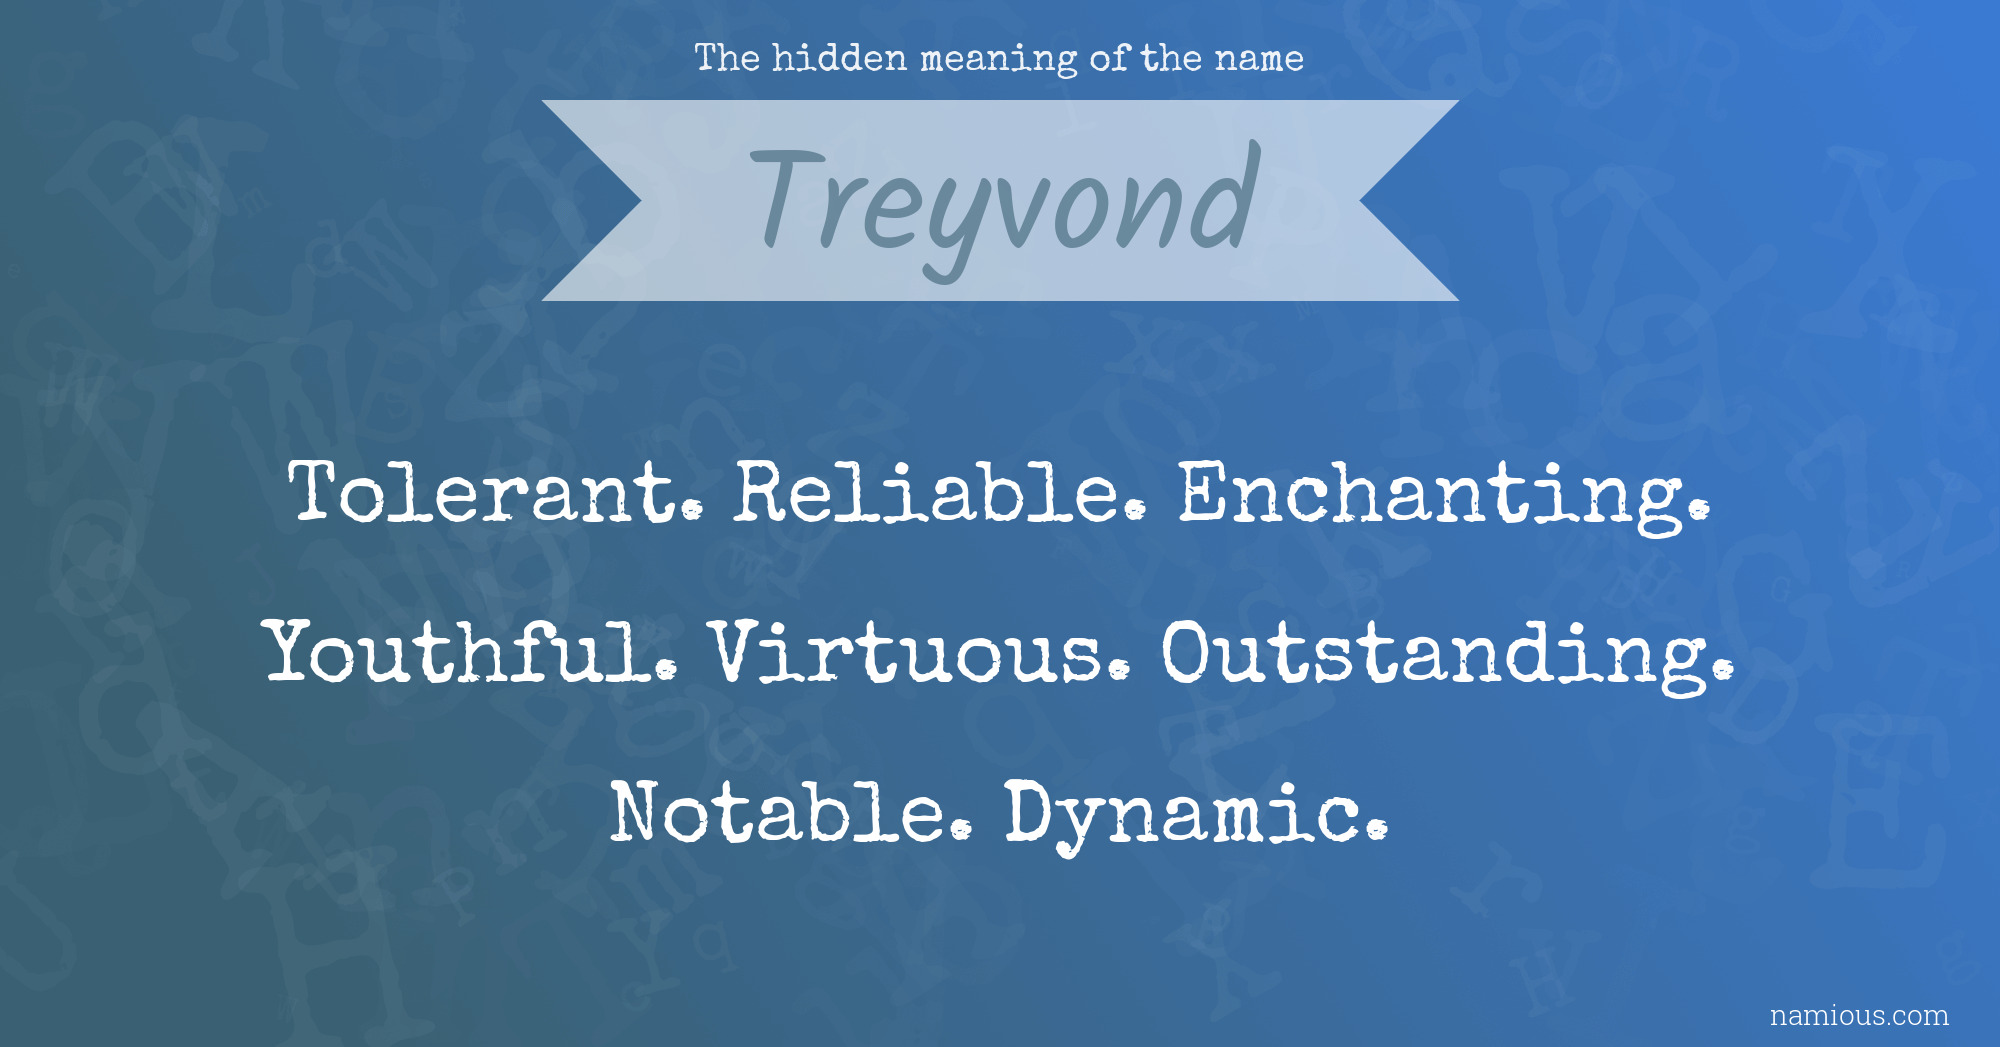 The hidden meaning of the name Treyvond